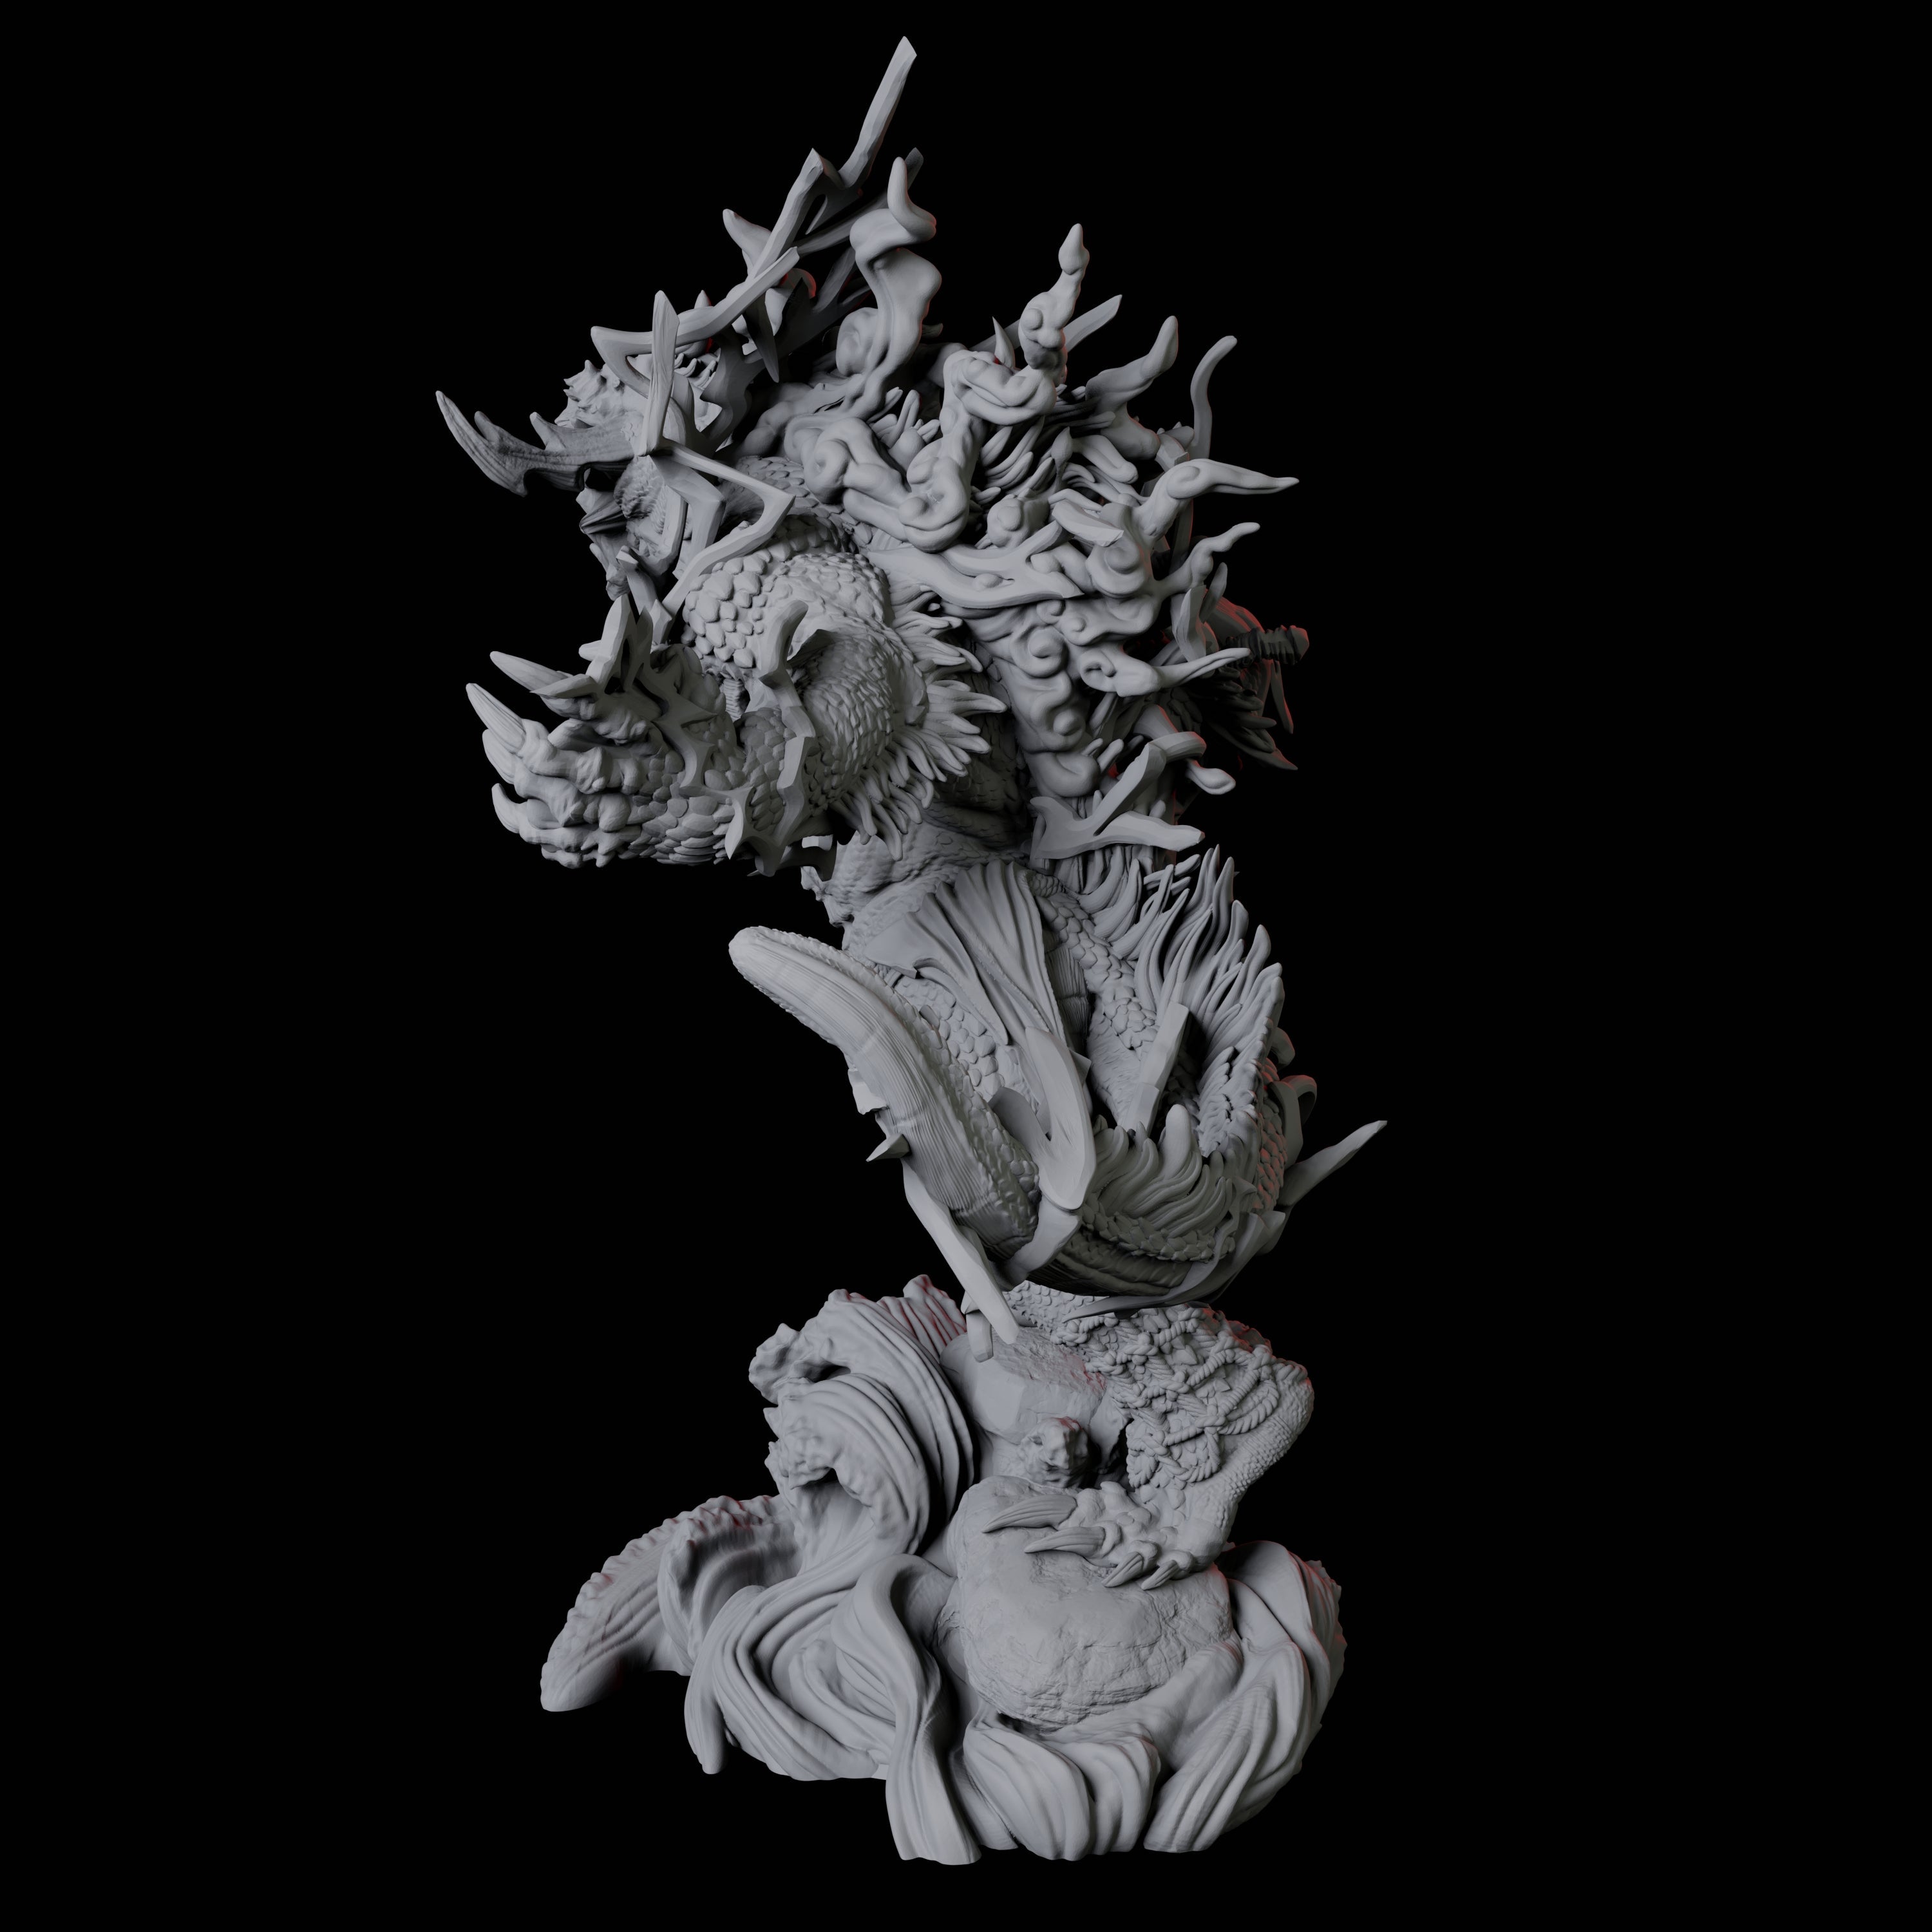 Storm Troll B Miniature for Dungeons and Dragons, Pathfinder or other TTRPGs